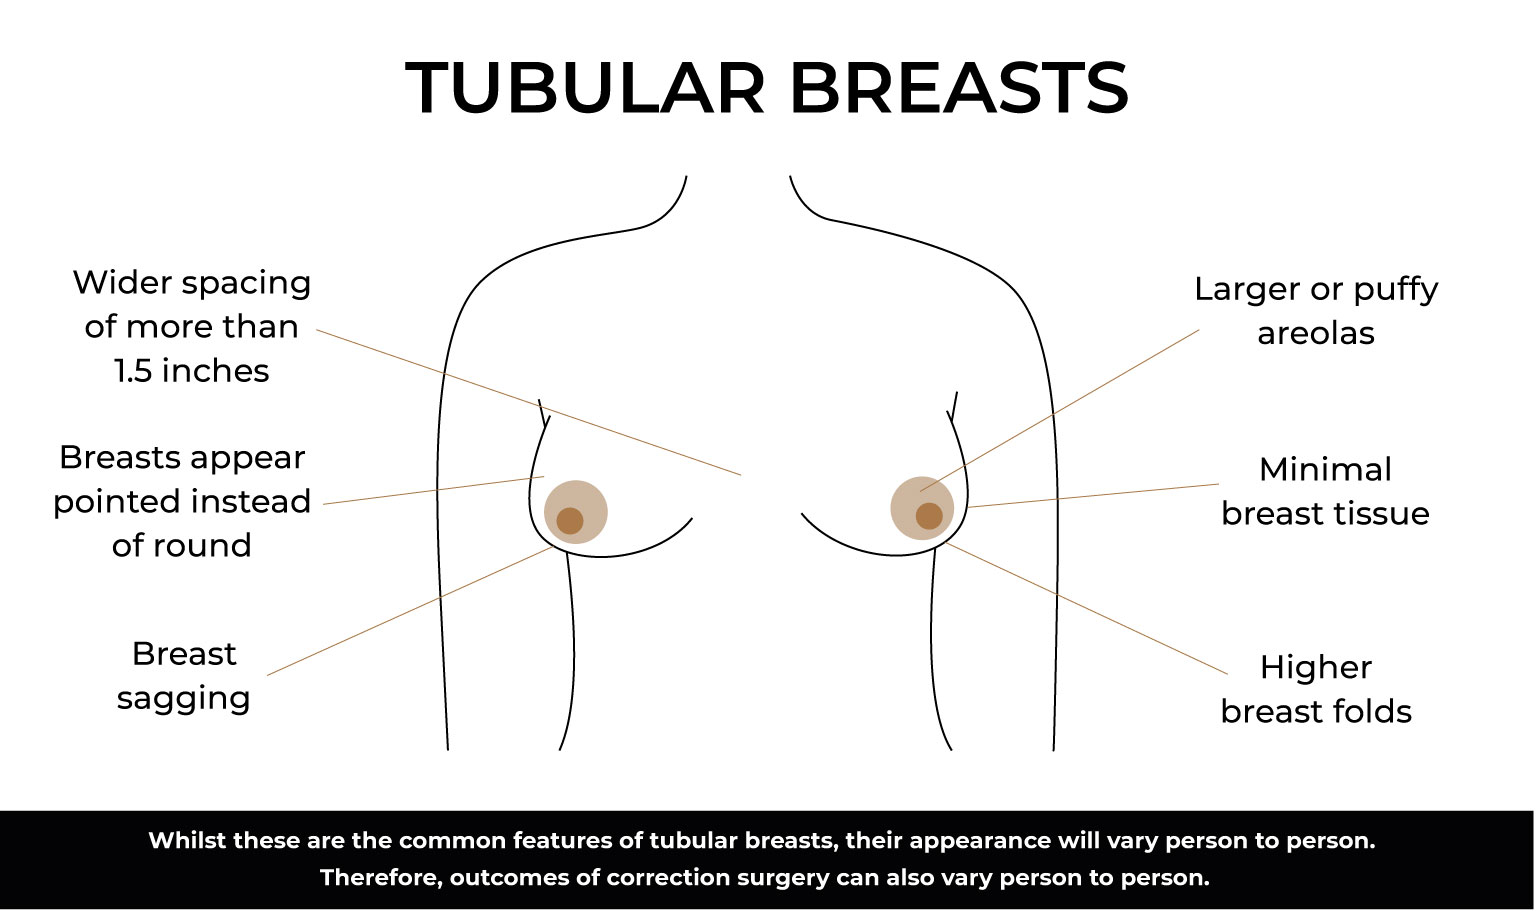 Tubular Breasts – Features & Correction Surgery